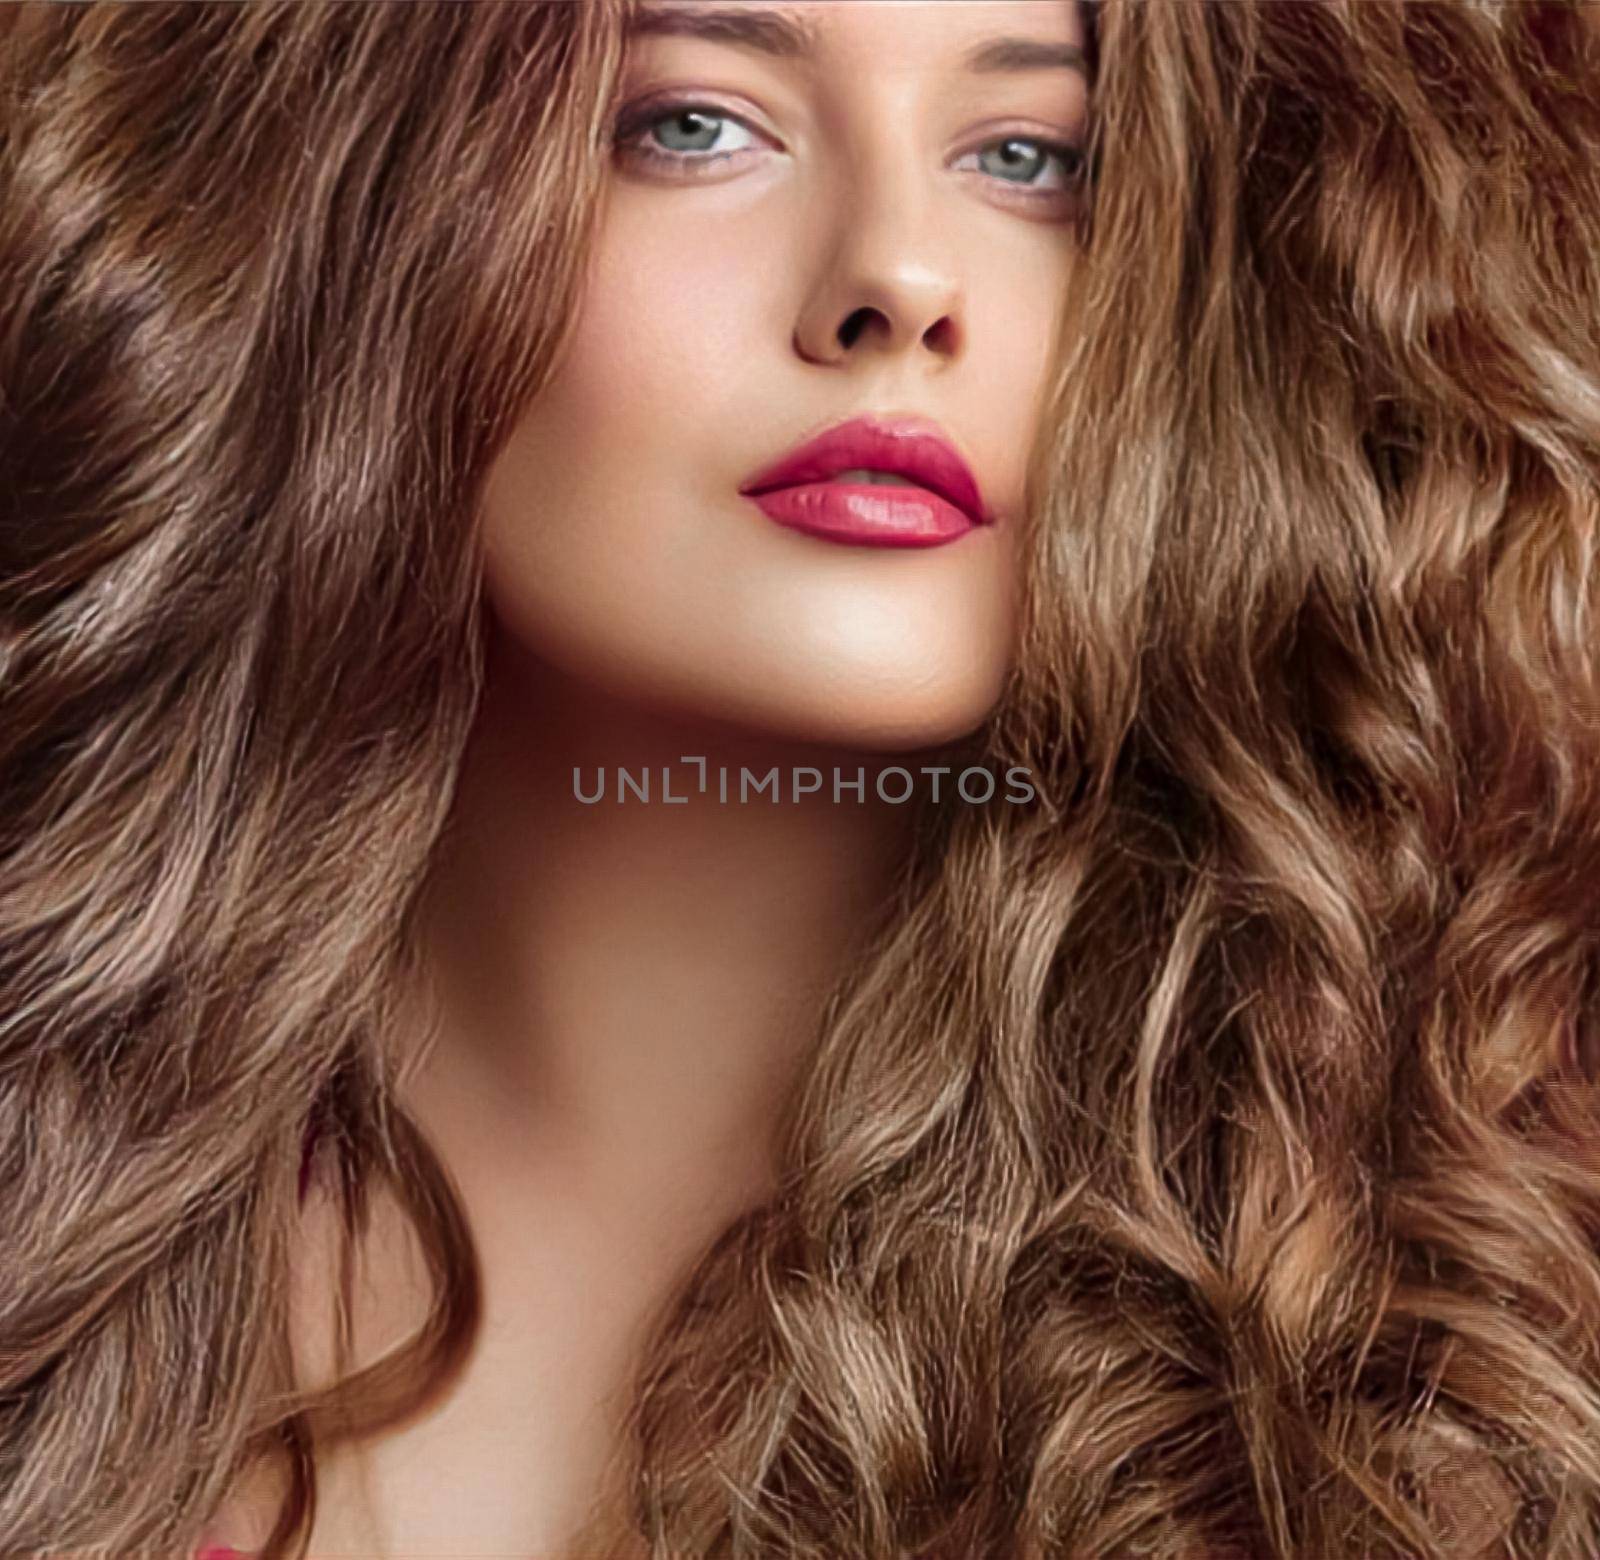 Hairstyle, beauty and hair care, beautiful woman with long natural brown hair, glamour portrait for hair salon and haircare by Anneleven